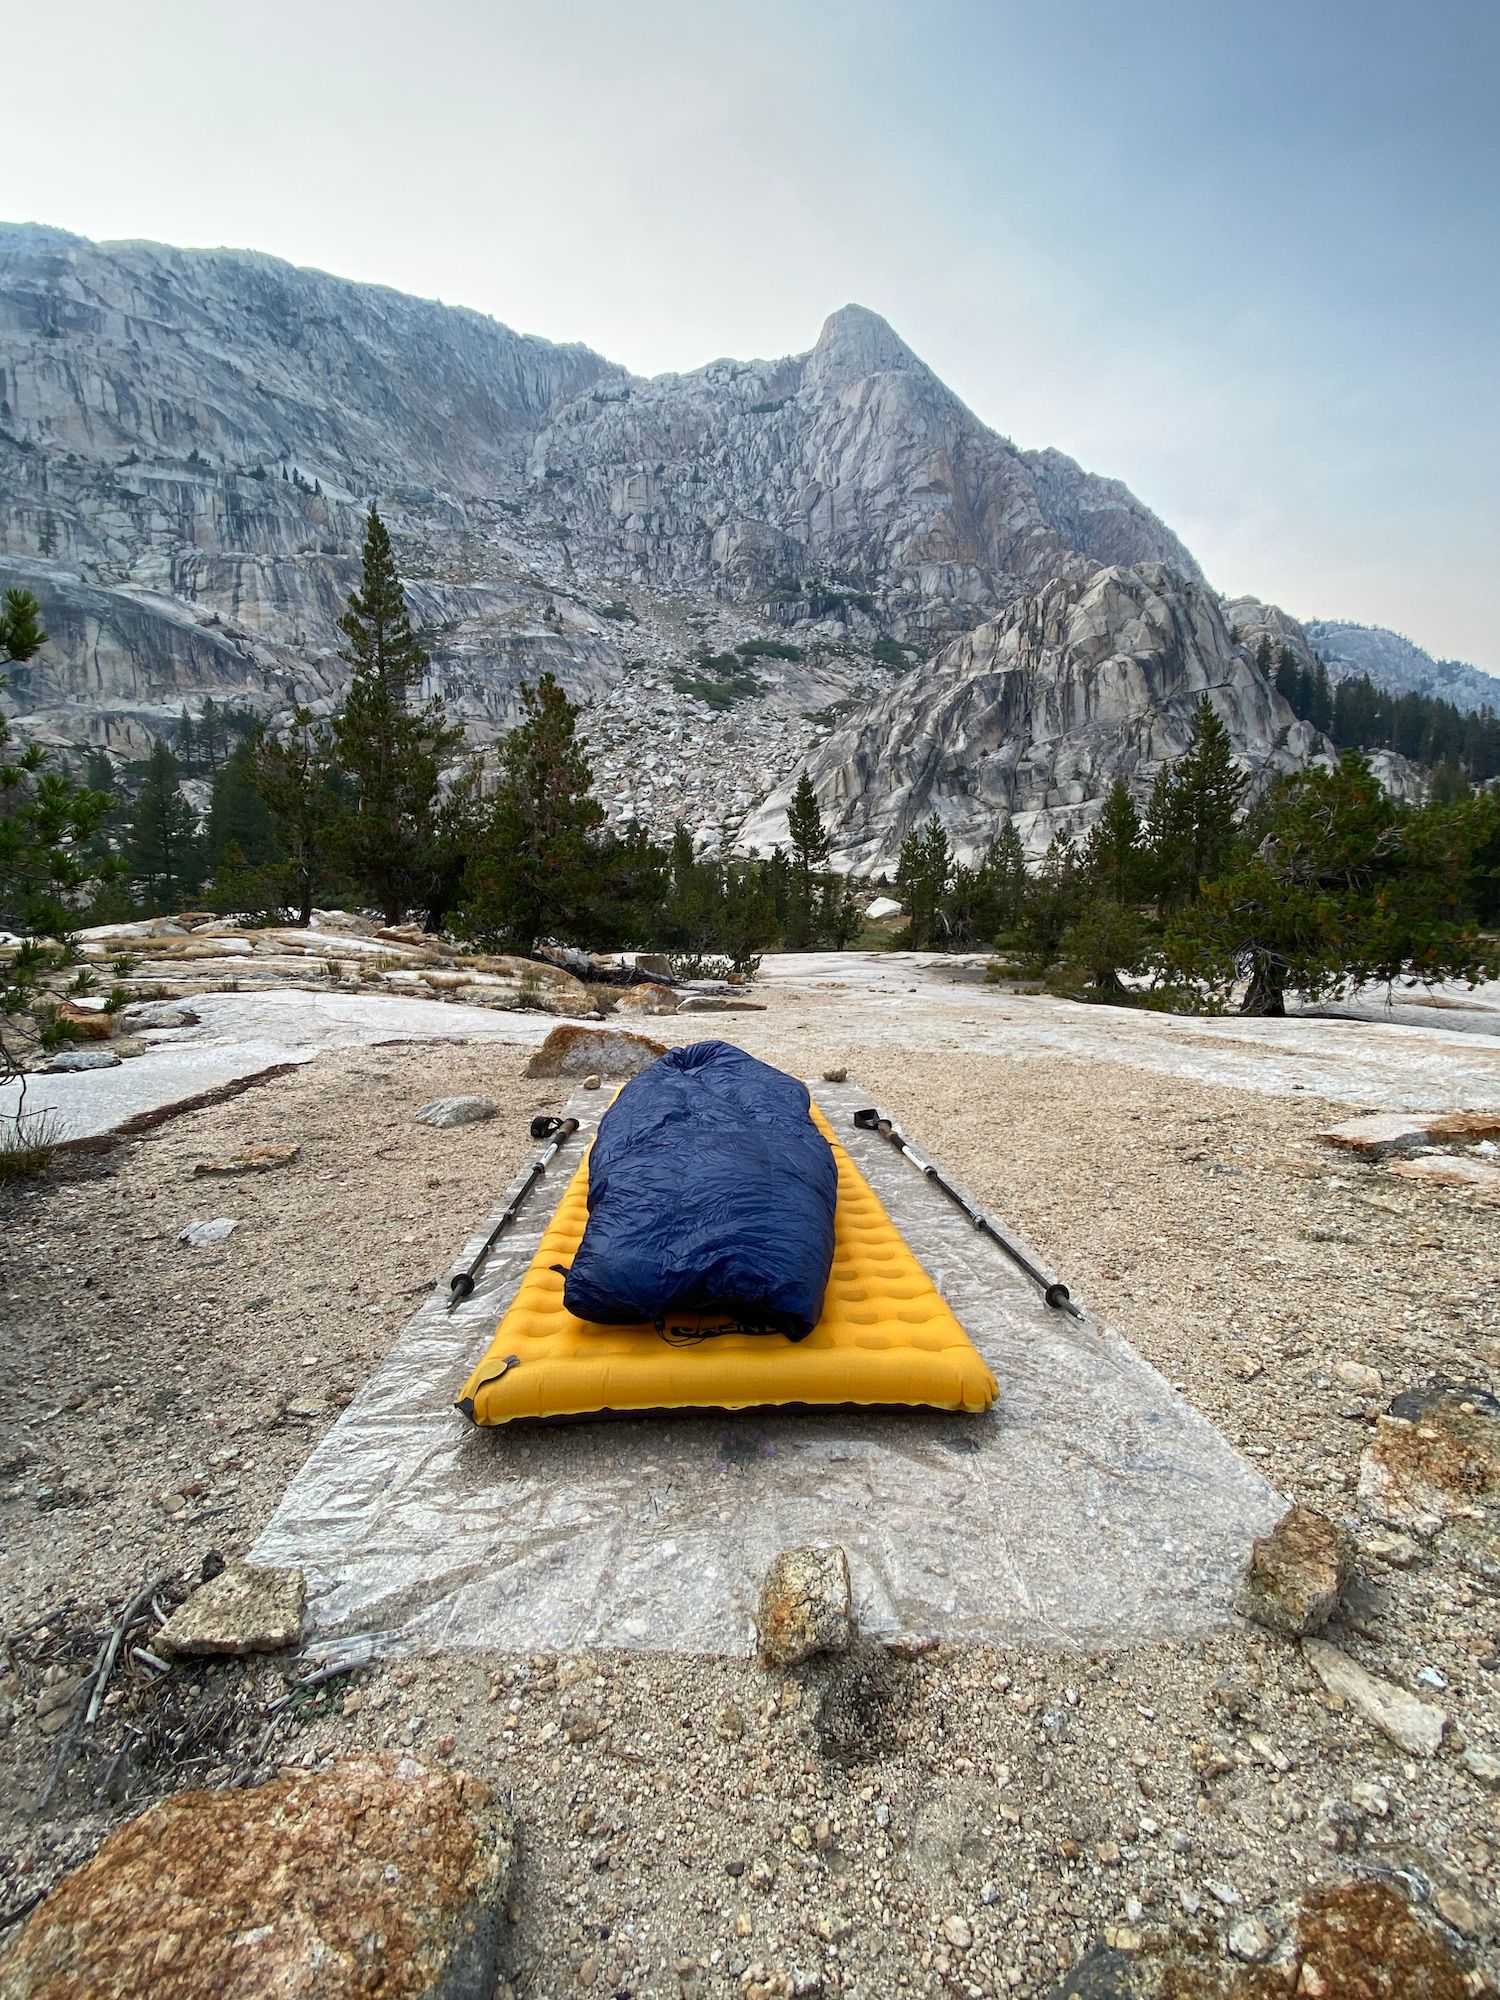 A sleeping bag on top of an air mattress with granite wall in the distance.